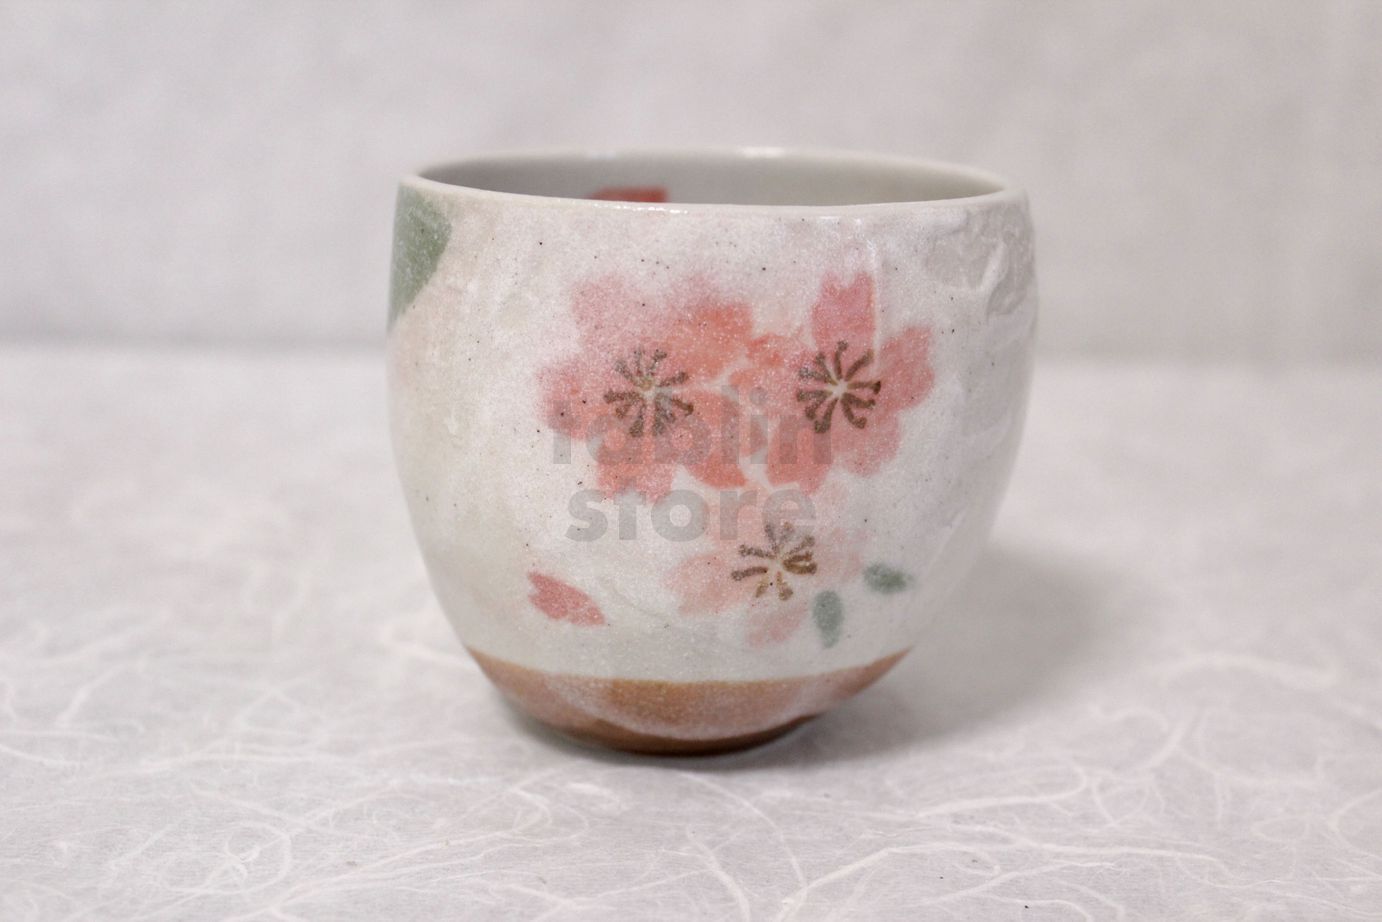 Mino Pottery Yunomi Tea Cups set Spring Cherry Blossoms Wooden Box JAPAN F/S 